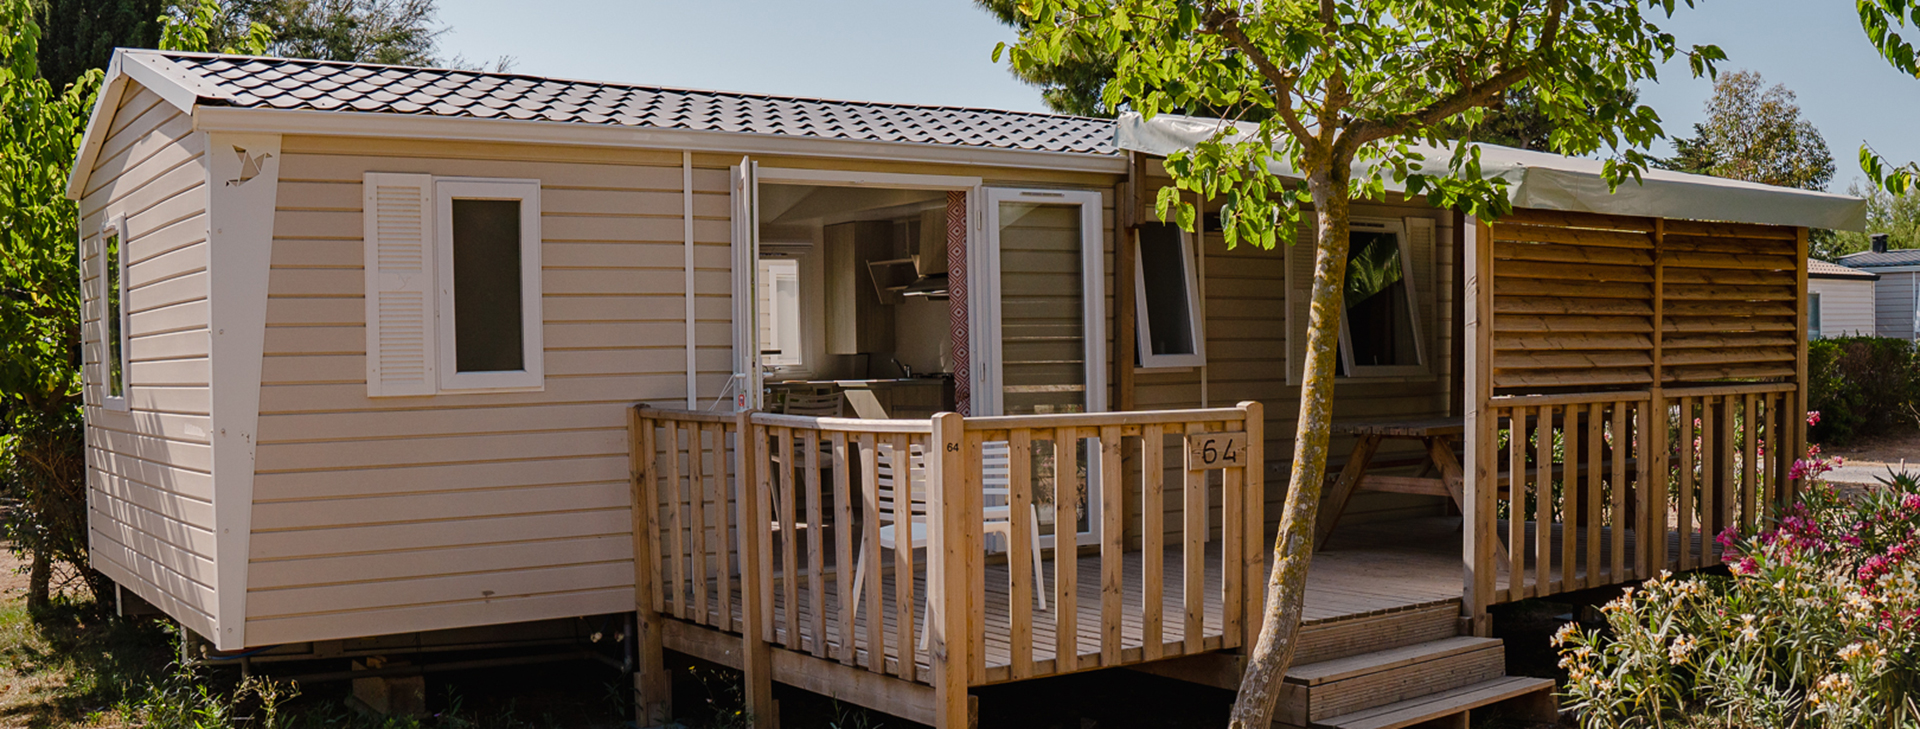 Exterior view of the 3-bedroom mobil-home cottage, 6-8 people, with semi-covered outdoor terrace, for rent at Cap du Roc campsite in Port-la-Nouvelle.